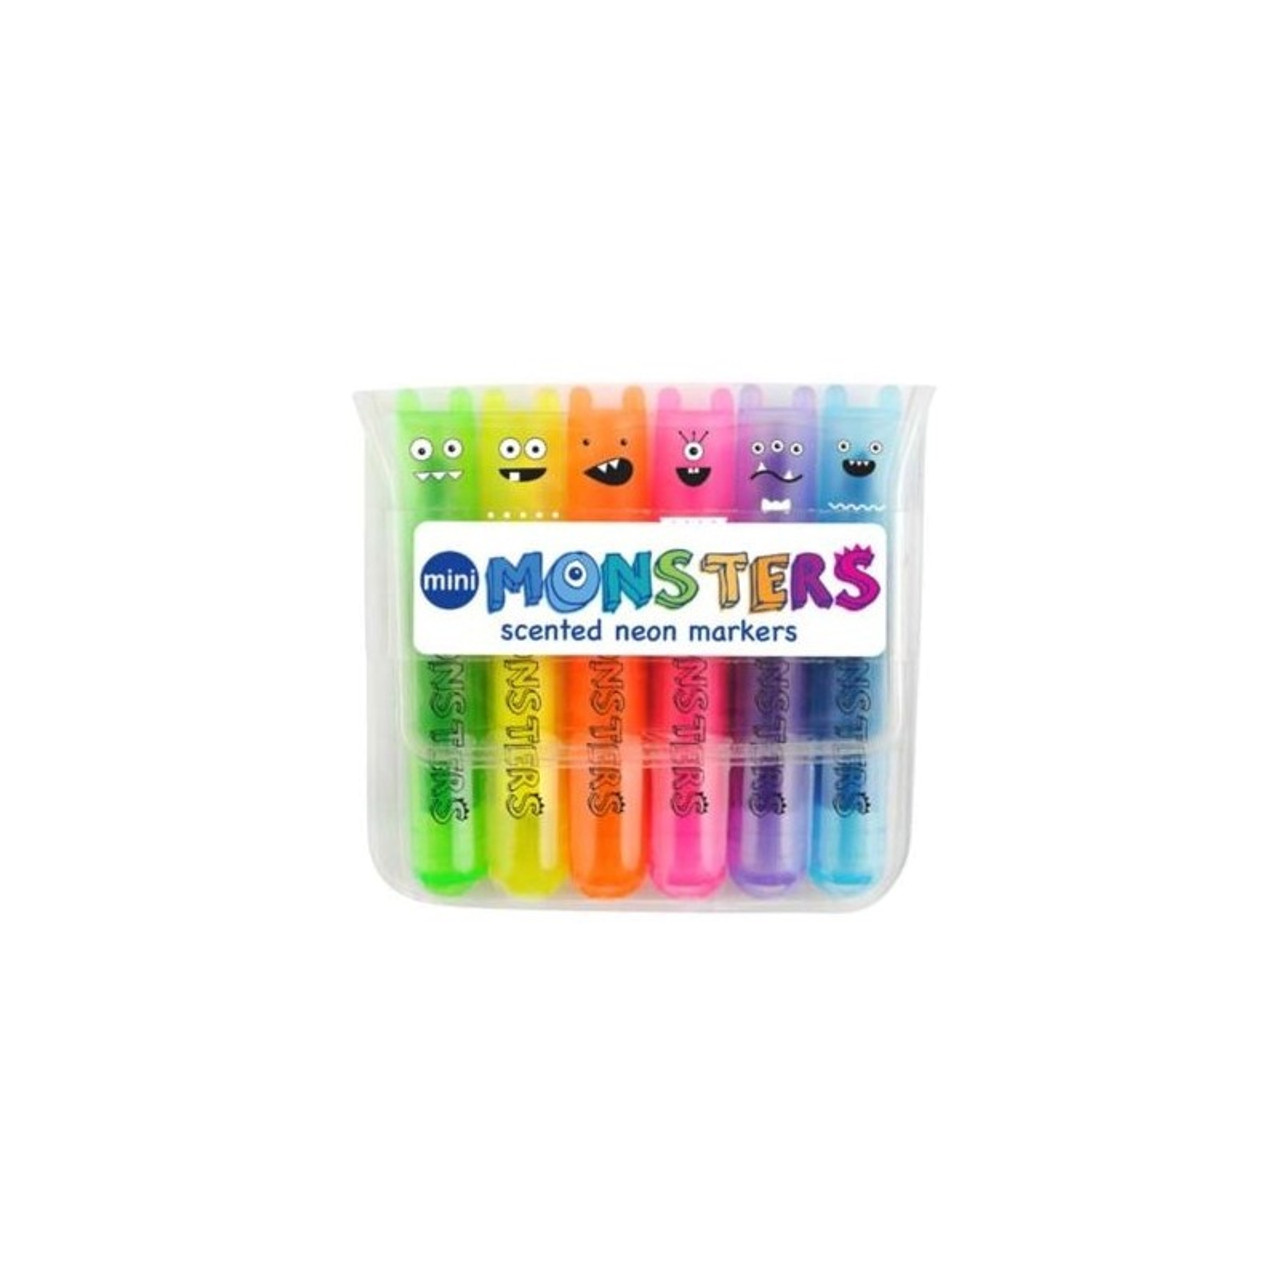 MINI MONSTERS SCENTED NEON MARKER